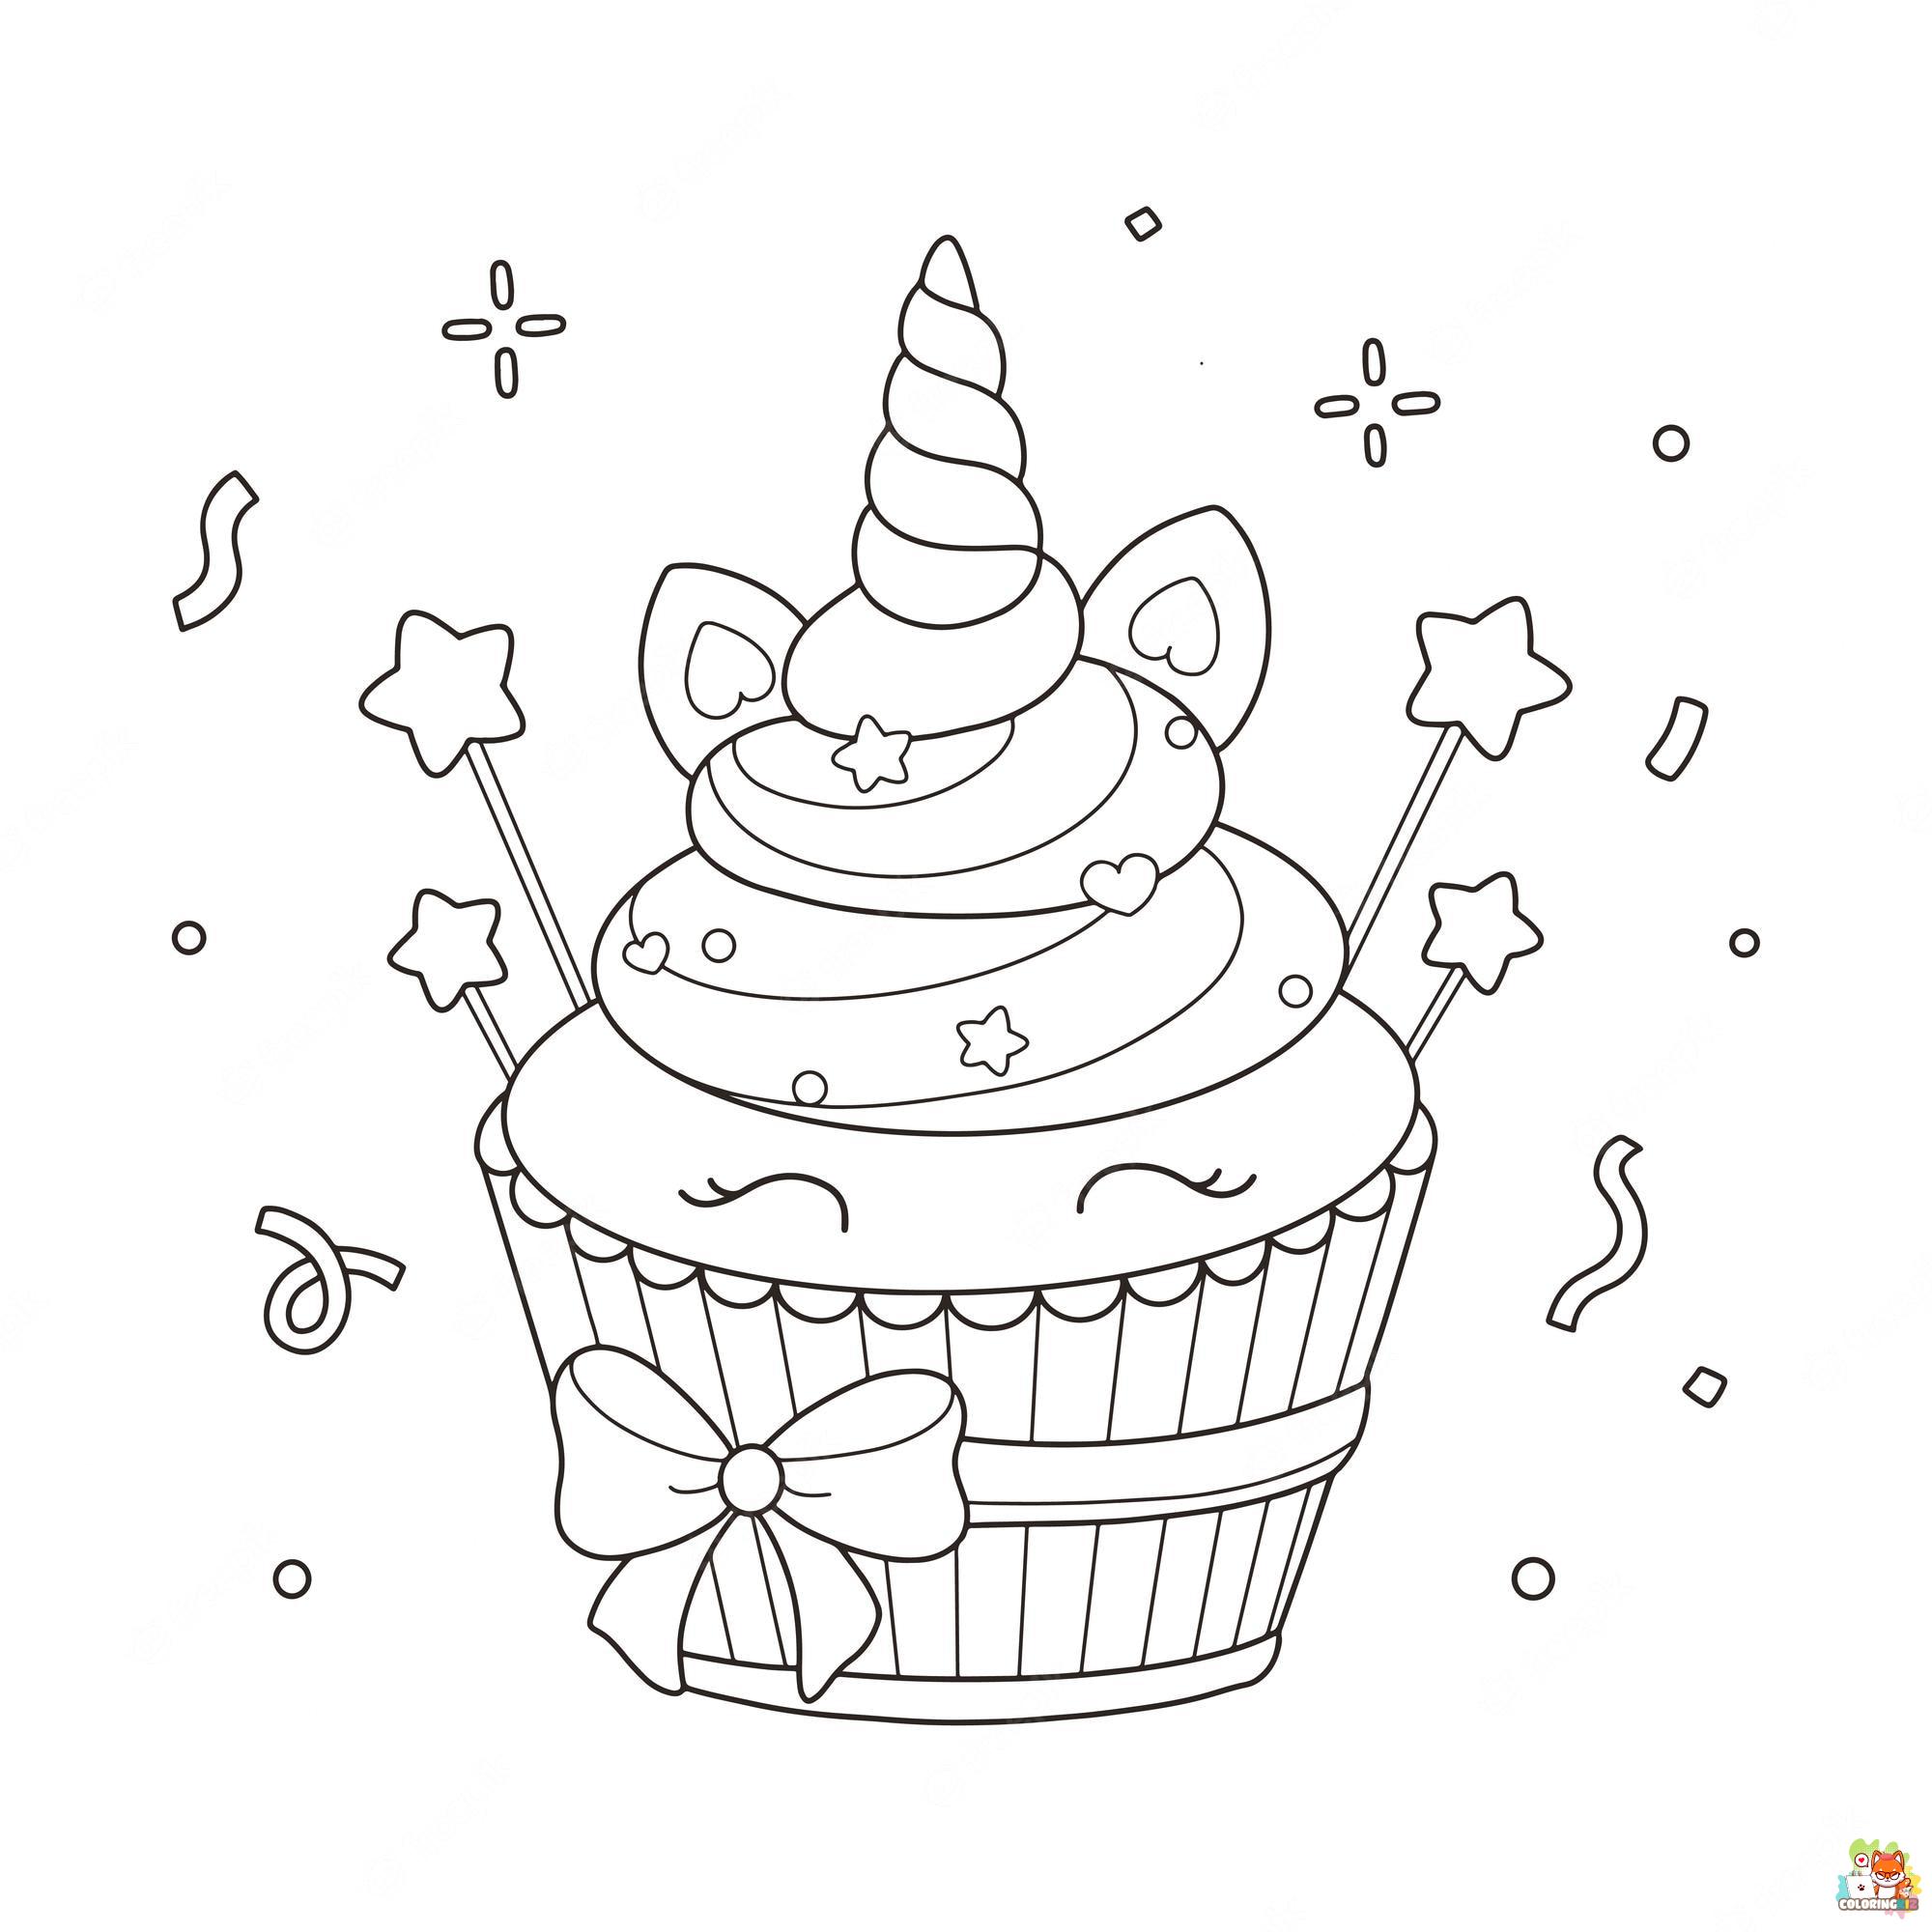 Unicorn Cake Coloring Pages 4